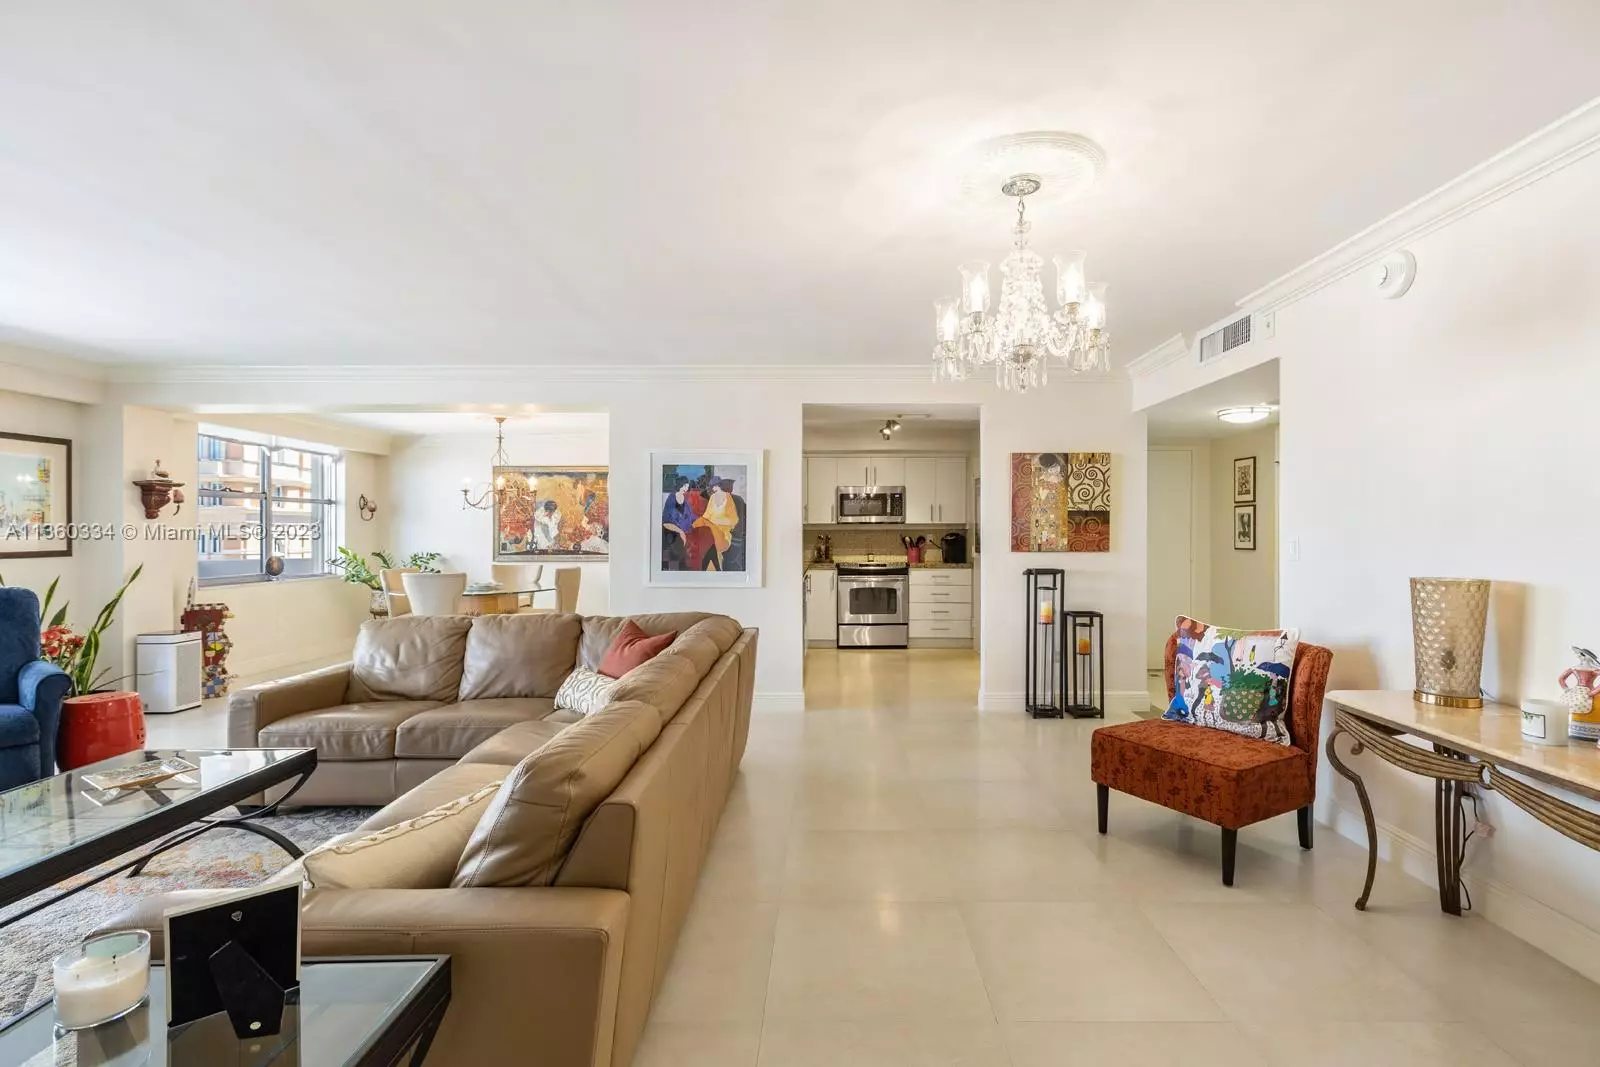 Spacious 1400 Sqft, Renovated Condo In The Heart Of Coral Gables